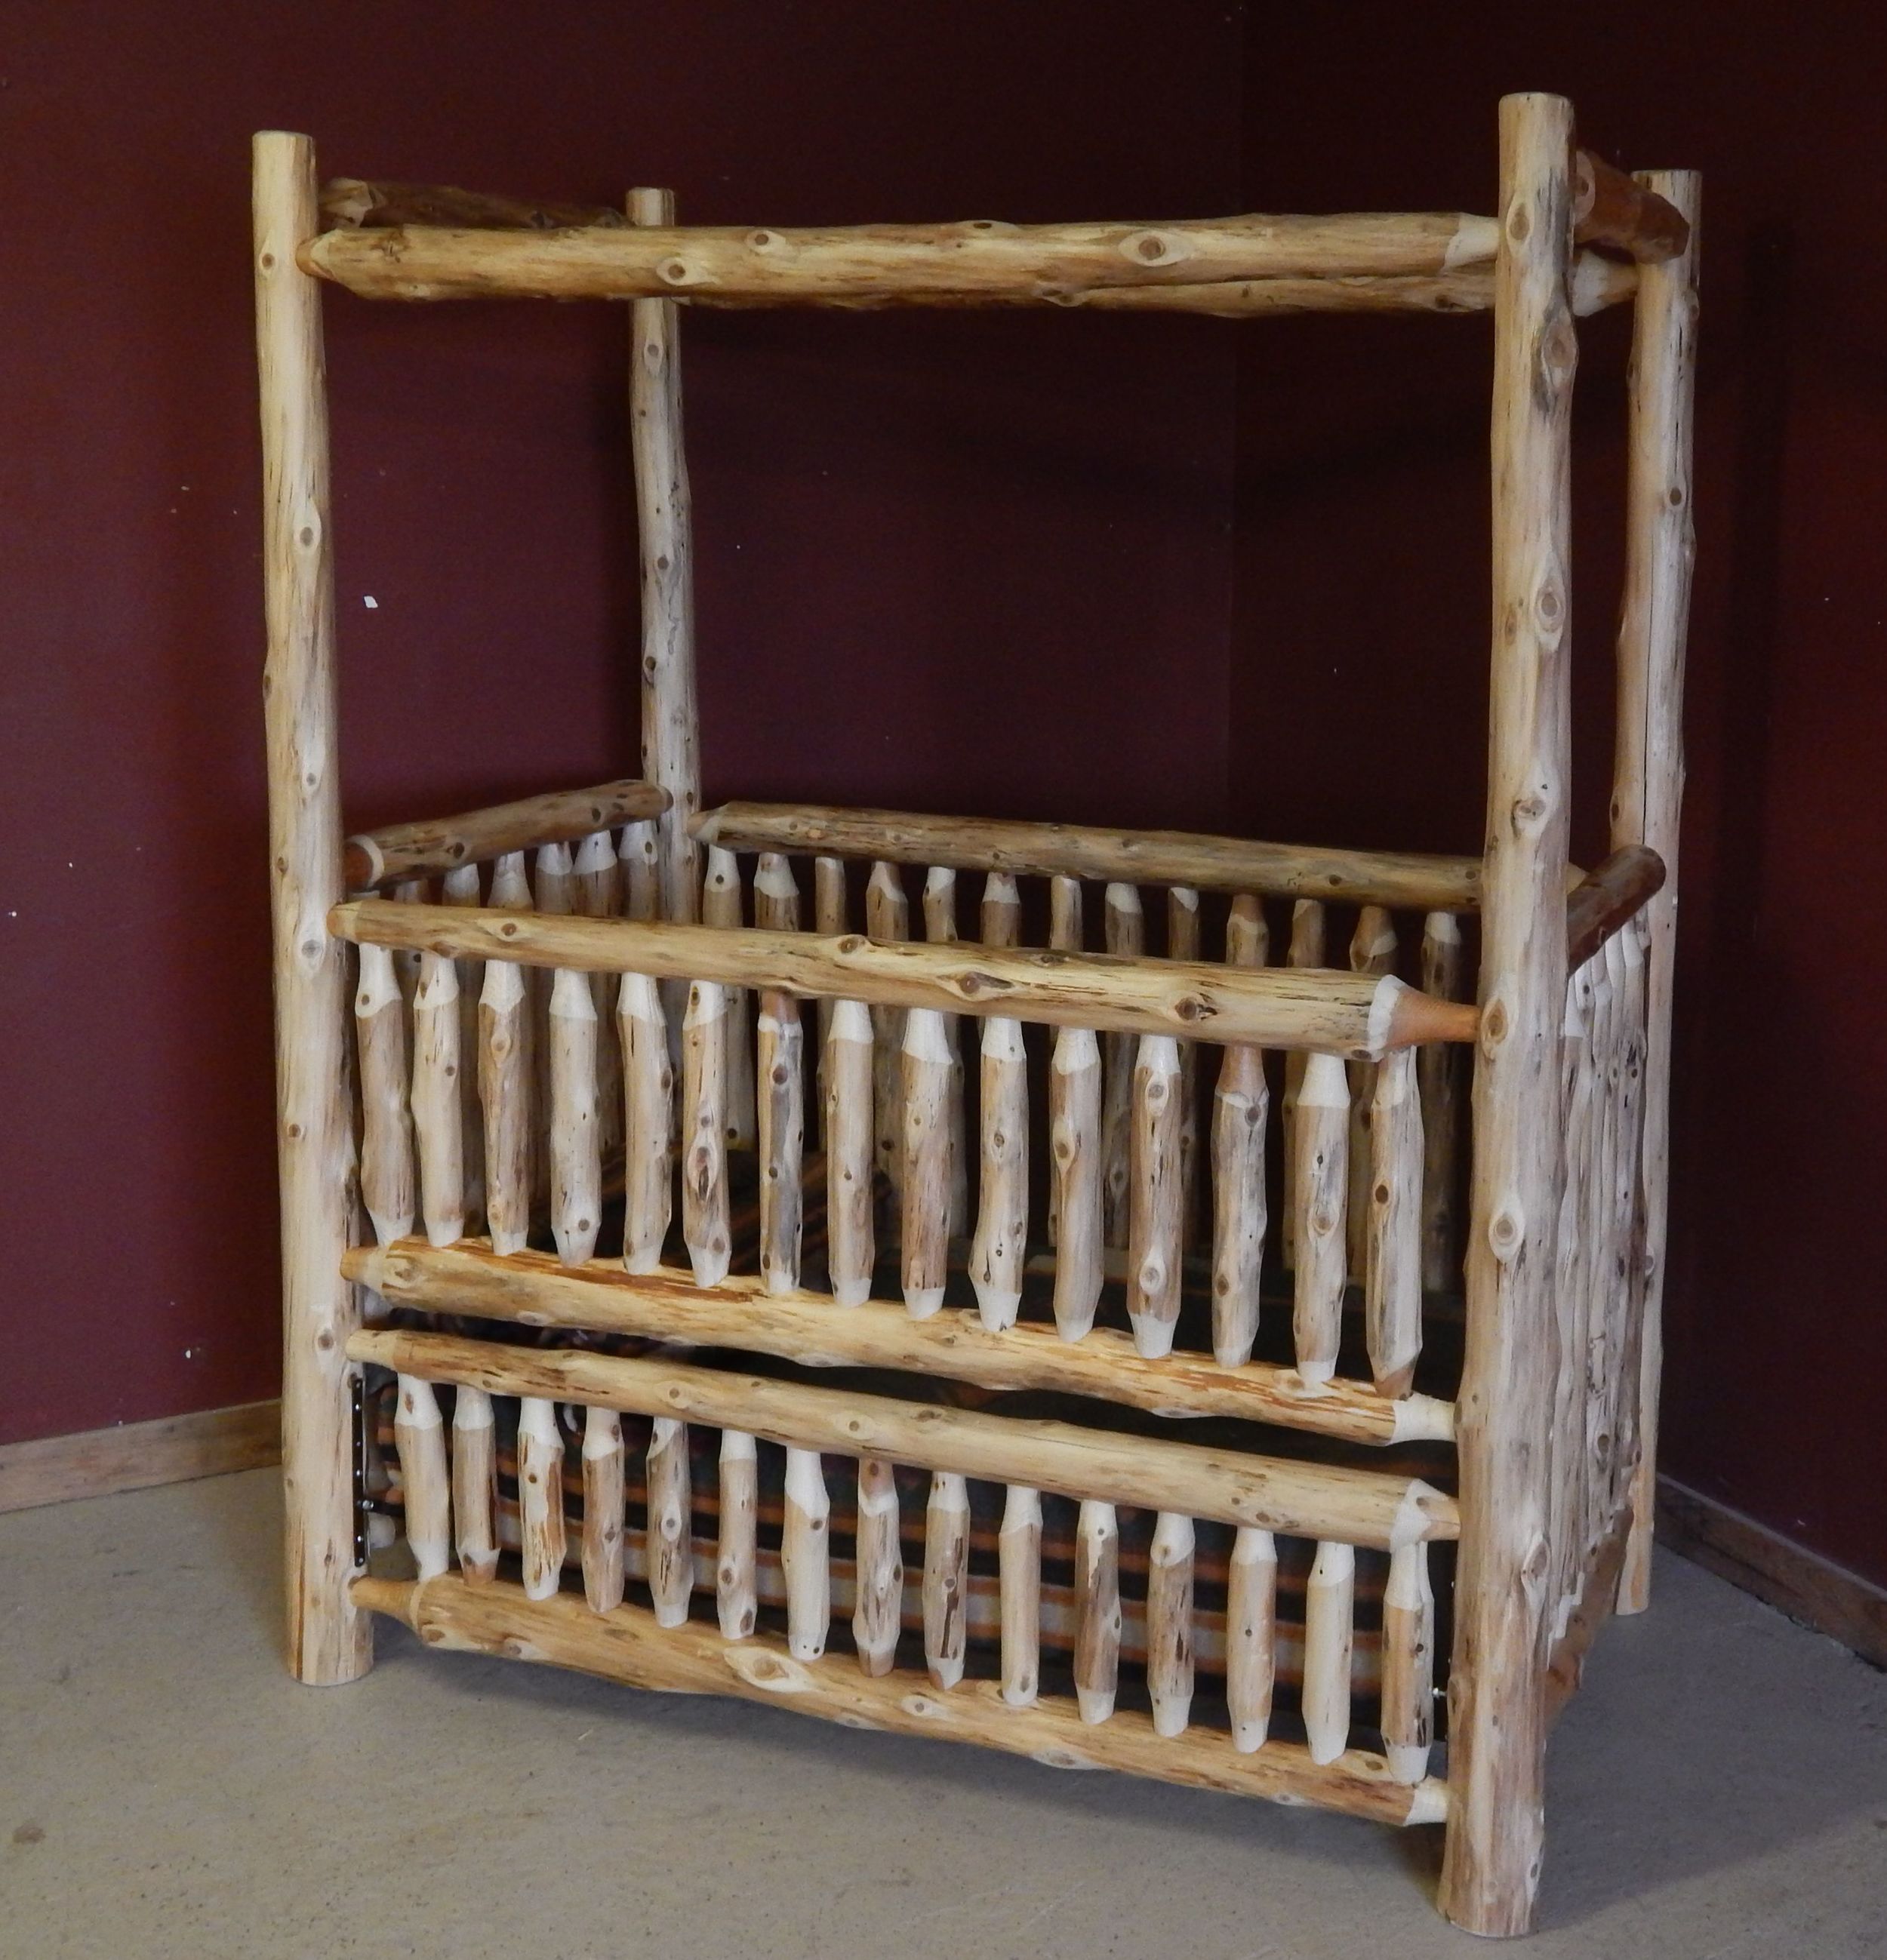 Log Canopy Baby Crib converts to toddler bed/full bed